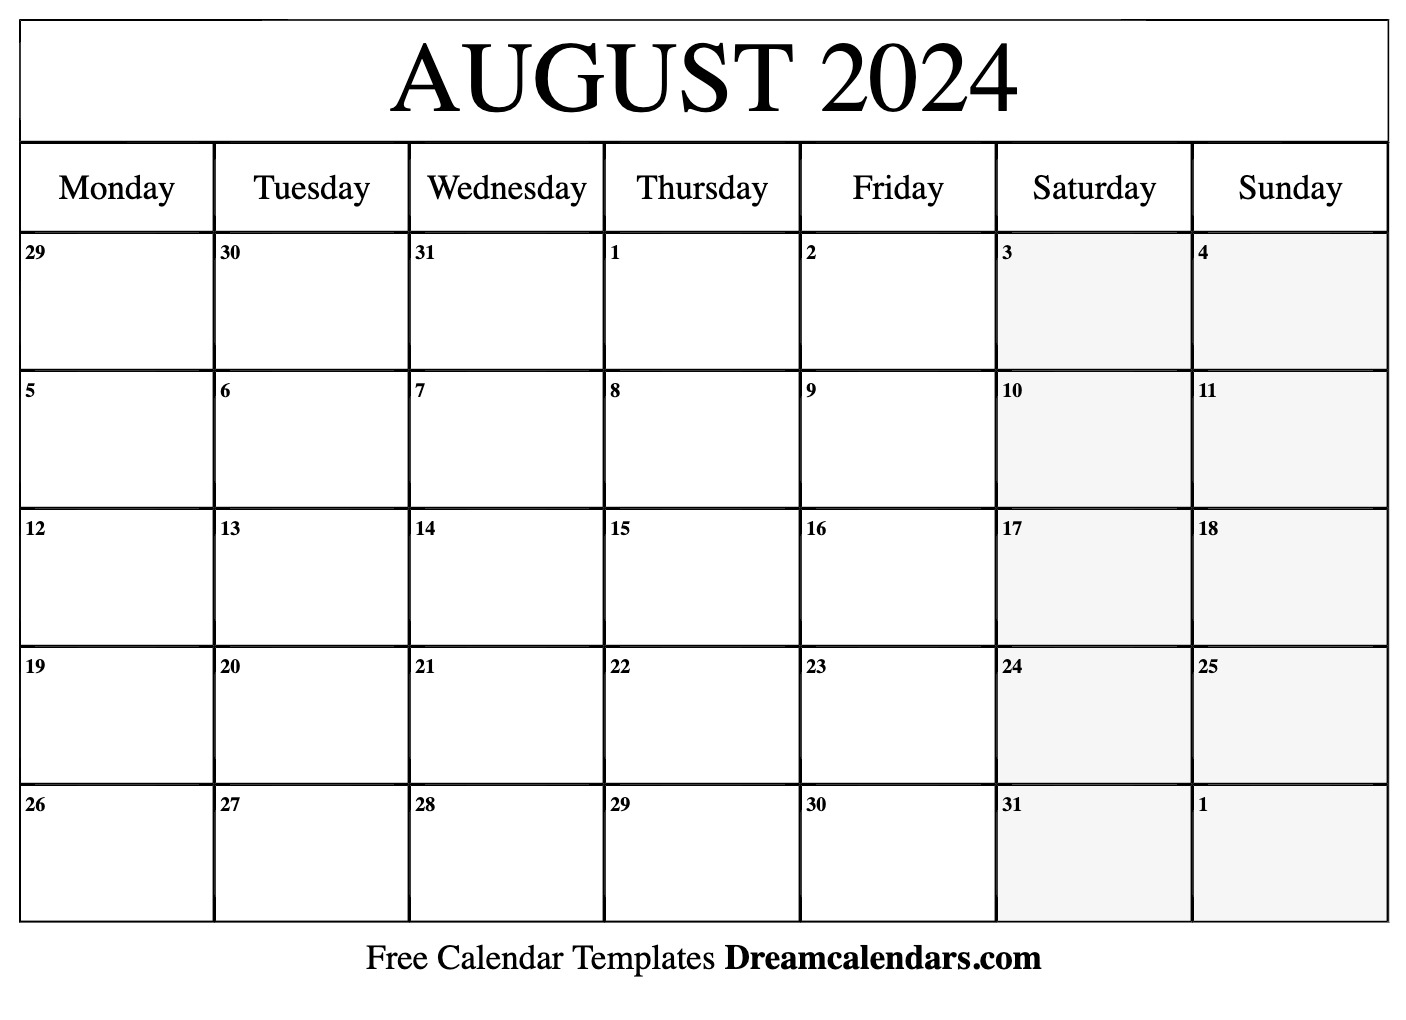 August 2024 Calendar | Free Blank Printable With Holidays for August 2024 Calendar With Holidays Printable